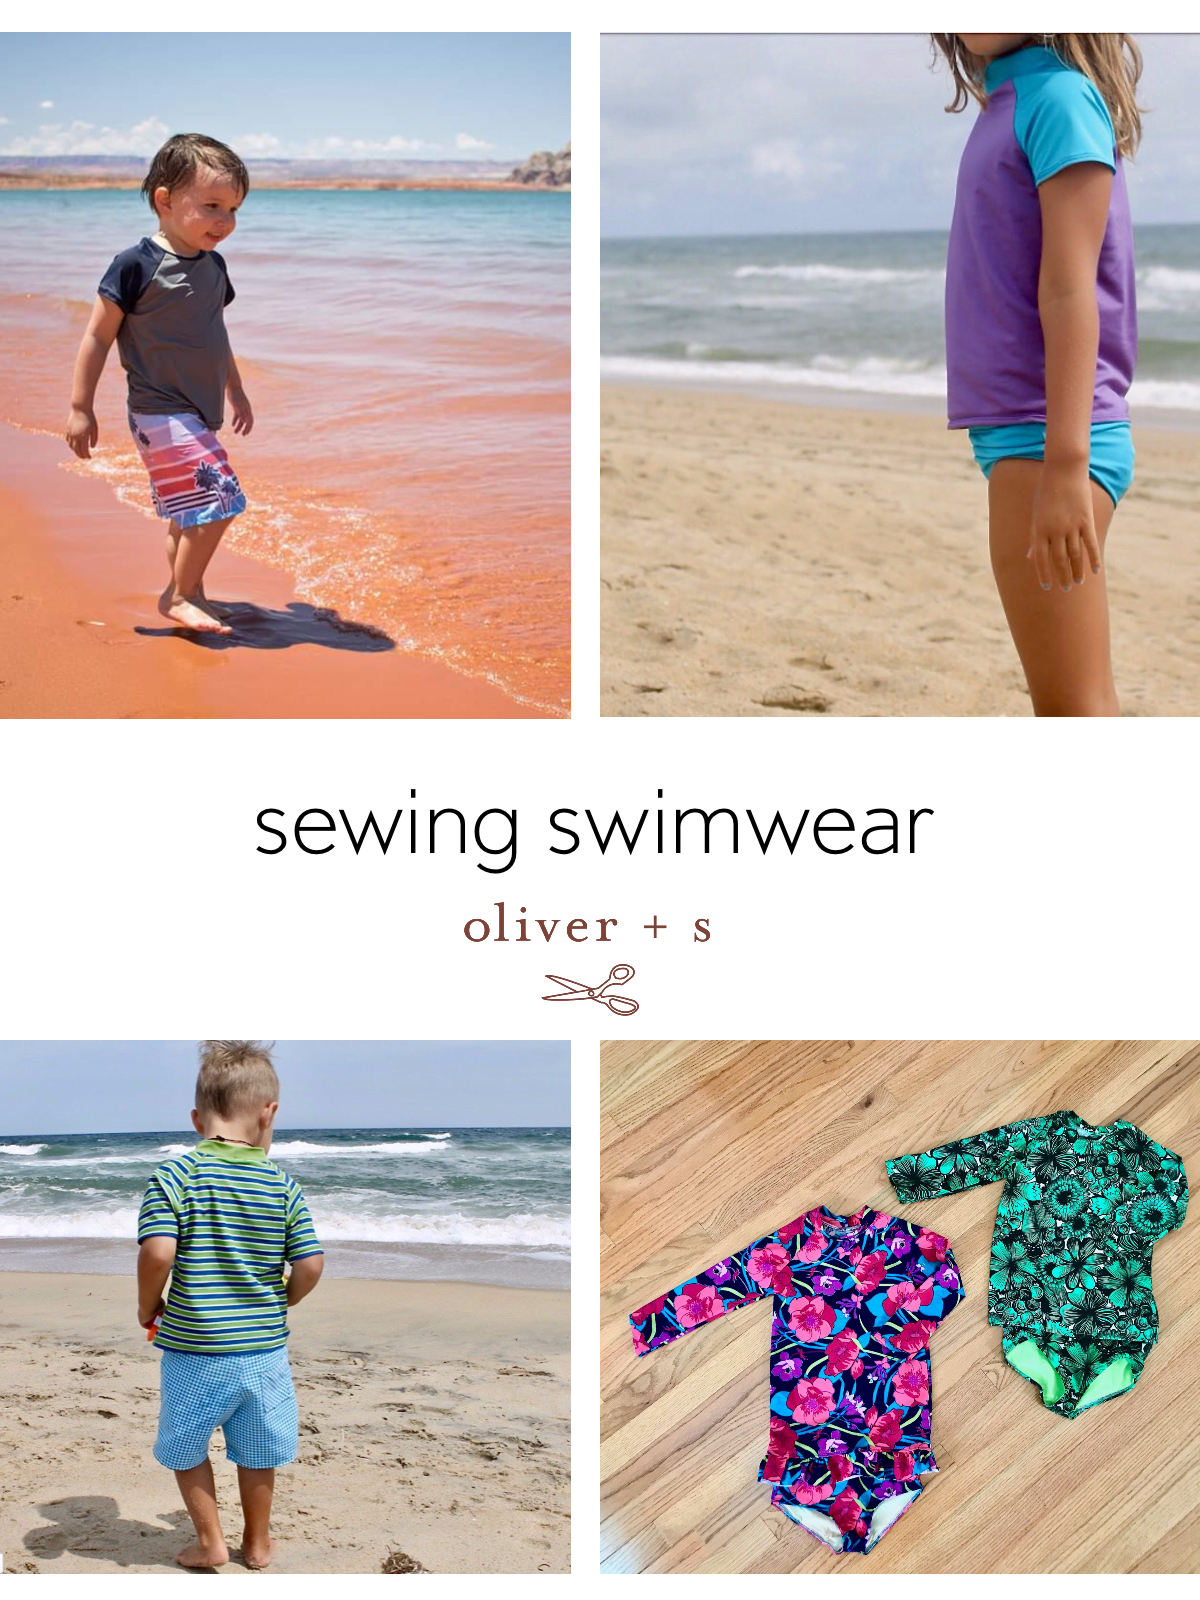 Sewing Swimwear With Oliver + S | Blog | Oliver + S